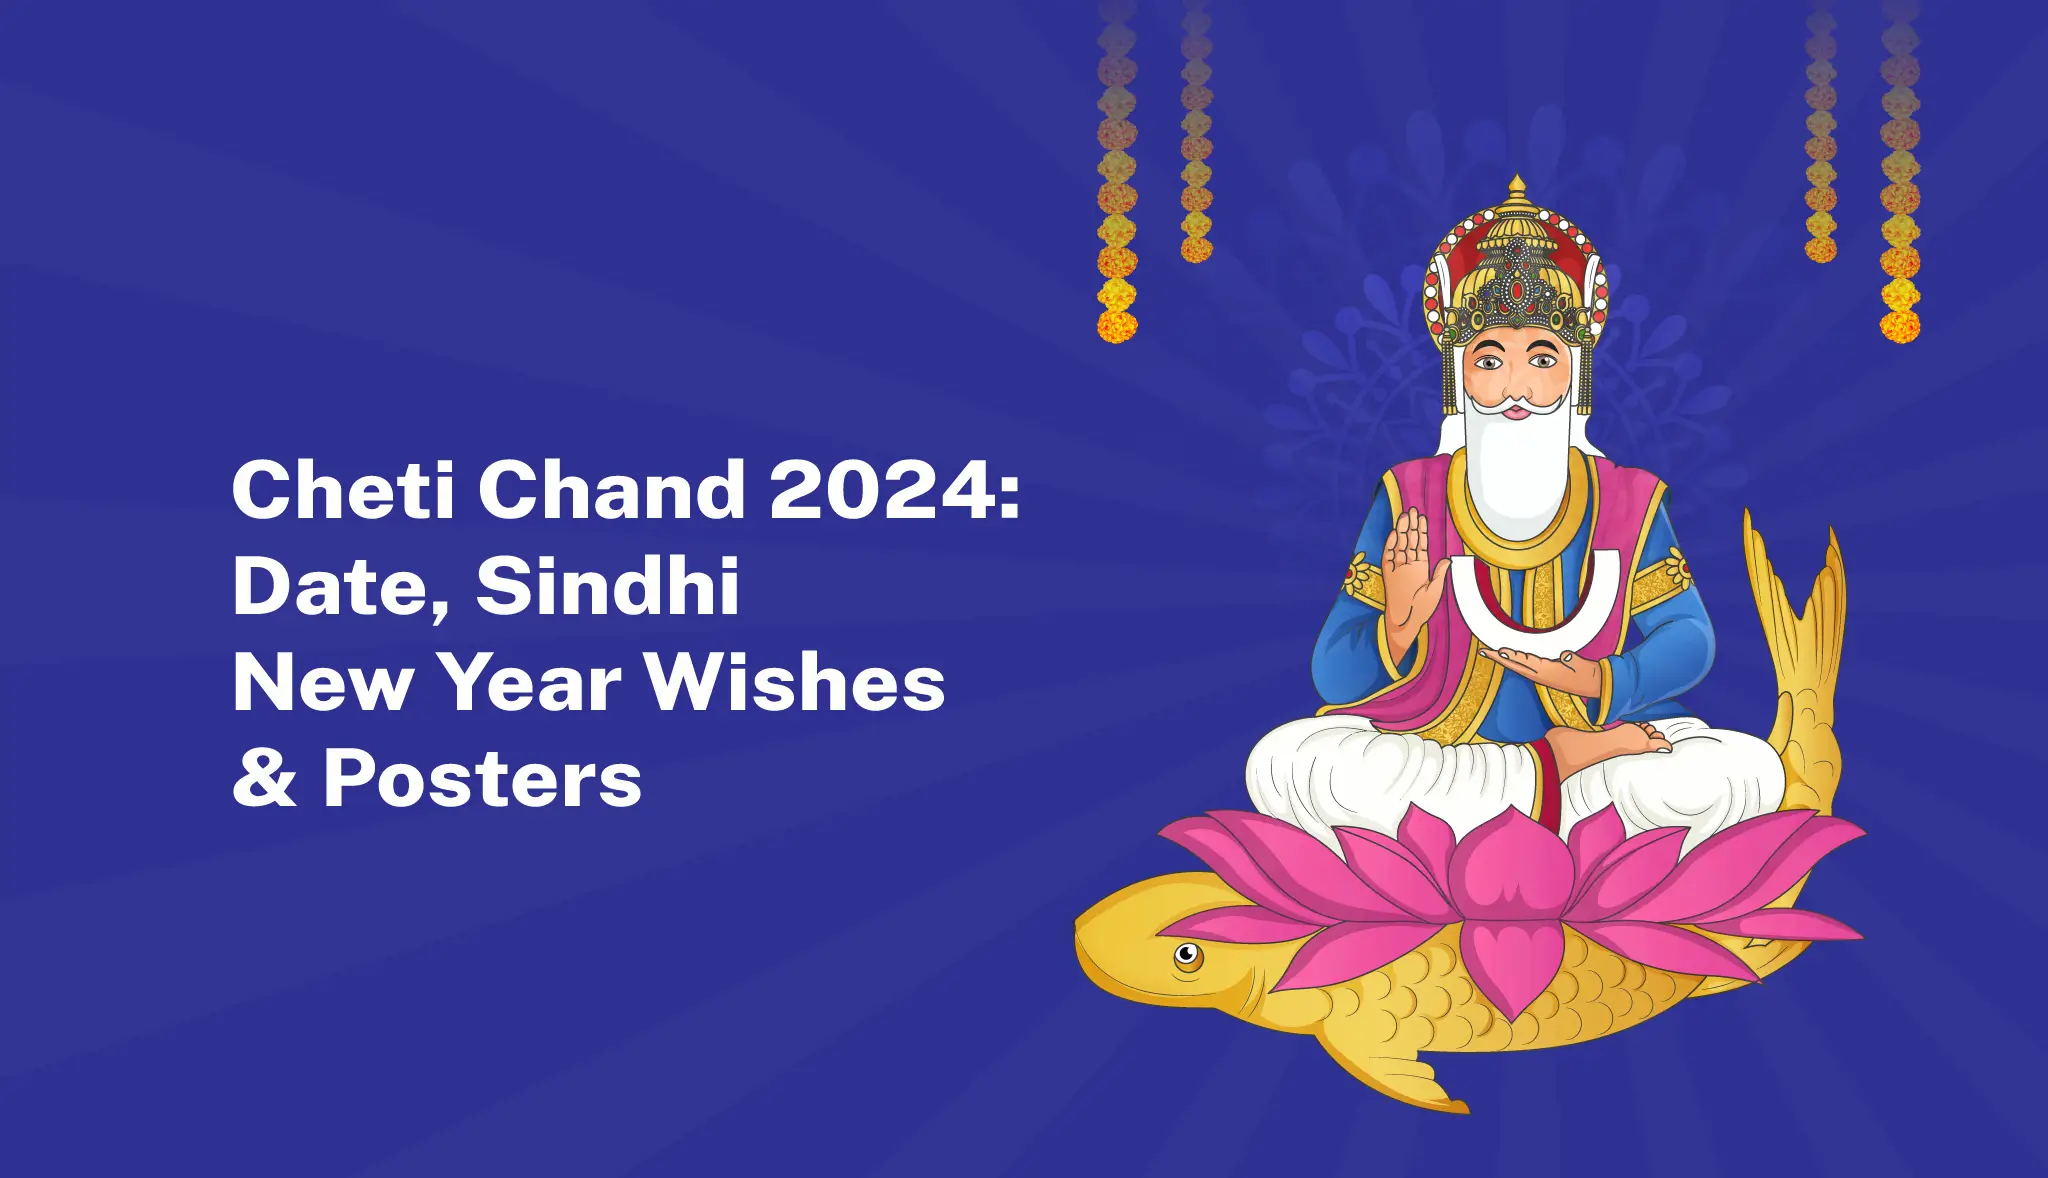 Cheti Chand 2024: Date, Sindhi New Year Wishes & Posters - Postive